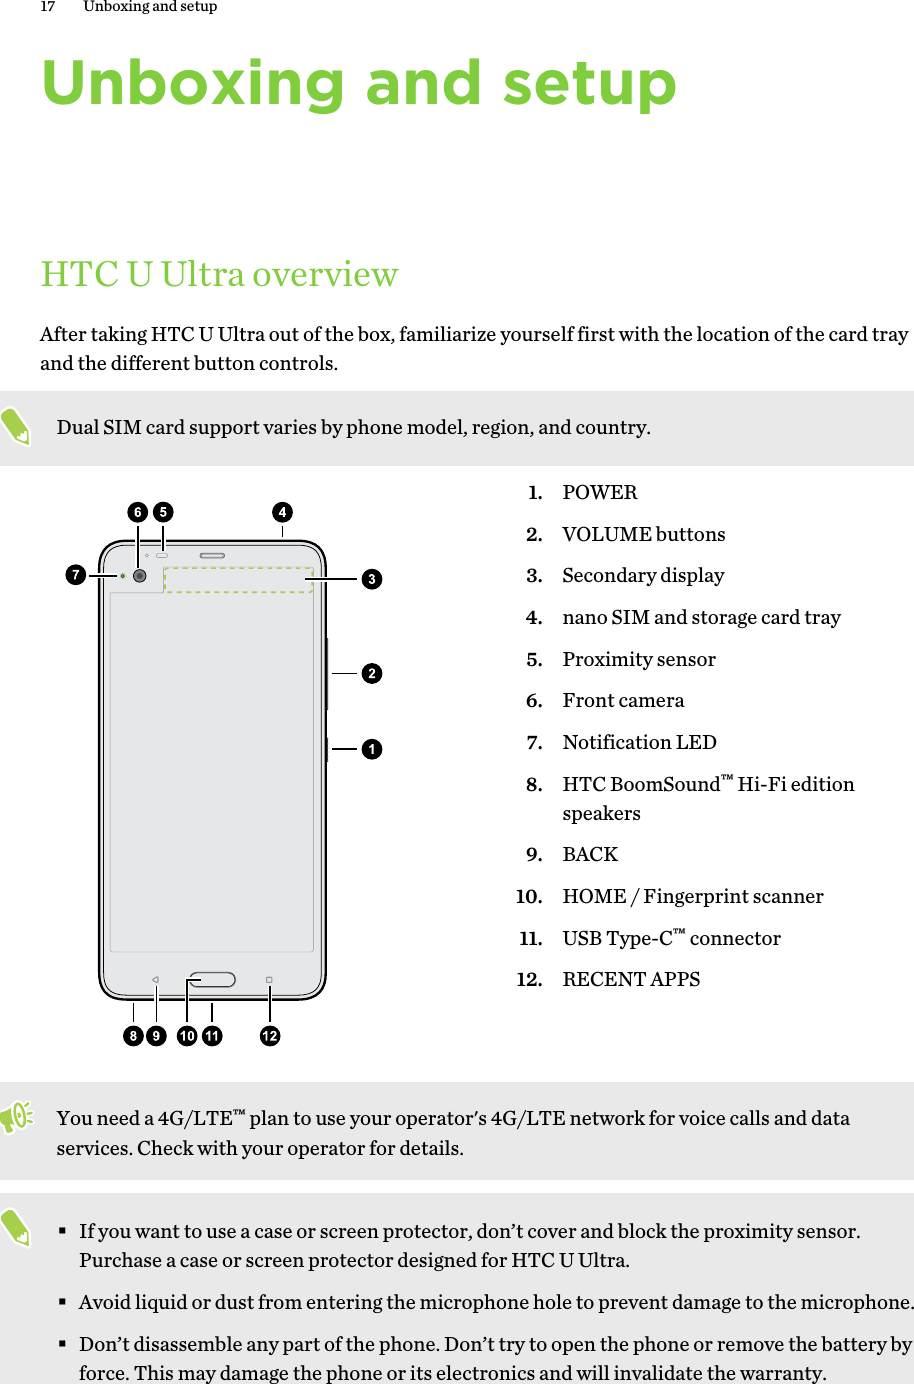 Unboxing and setupHTC U Ultra overviewAfter taking HTC U Ultra out of the box, familiarize yourself first with the location of the card trayand the different button controls.Dual SIM card support varies by phone model, region, and country.1. POWER2. VOLUME buttons3. Secondary display4. nano SIM and storage card tray5. Proximity sensor6. Front camera7. Notification LED8. HTC BoomSound™ Hi-Fi editionspeakers9. BACK10. HOME / Fingerprint scanner11. USB Type-C™ connector12. RECENT APPSYou need a 4G/LTE™ plan to use your operator&apos;s 4G/LTE network for voice calls and dataservices. Check with your operator for details.§If you want to use a case or screen protector, don’t cover and block the proximity sensor.Purchase a case or screen protector designed for HTC U Ultra.§Avoid liquid or dust from entering the microphone hole to prevent damage to the microphone.§Don’t disassemble any part of the phone. Don’t try to open the phone or remove the battery byforce. This may damage the phone or its electronics and will invalidate the warranty.17 Unboxing and setup